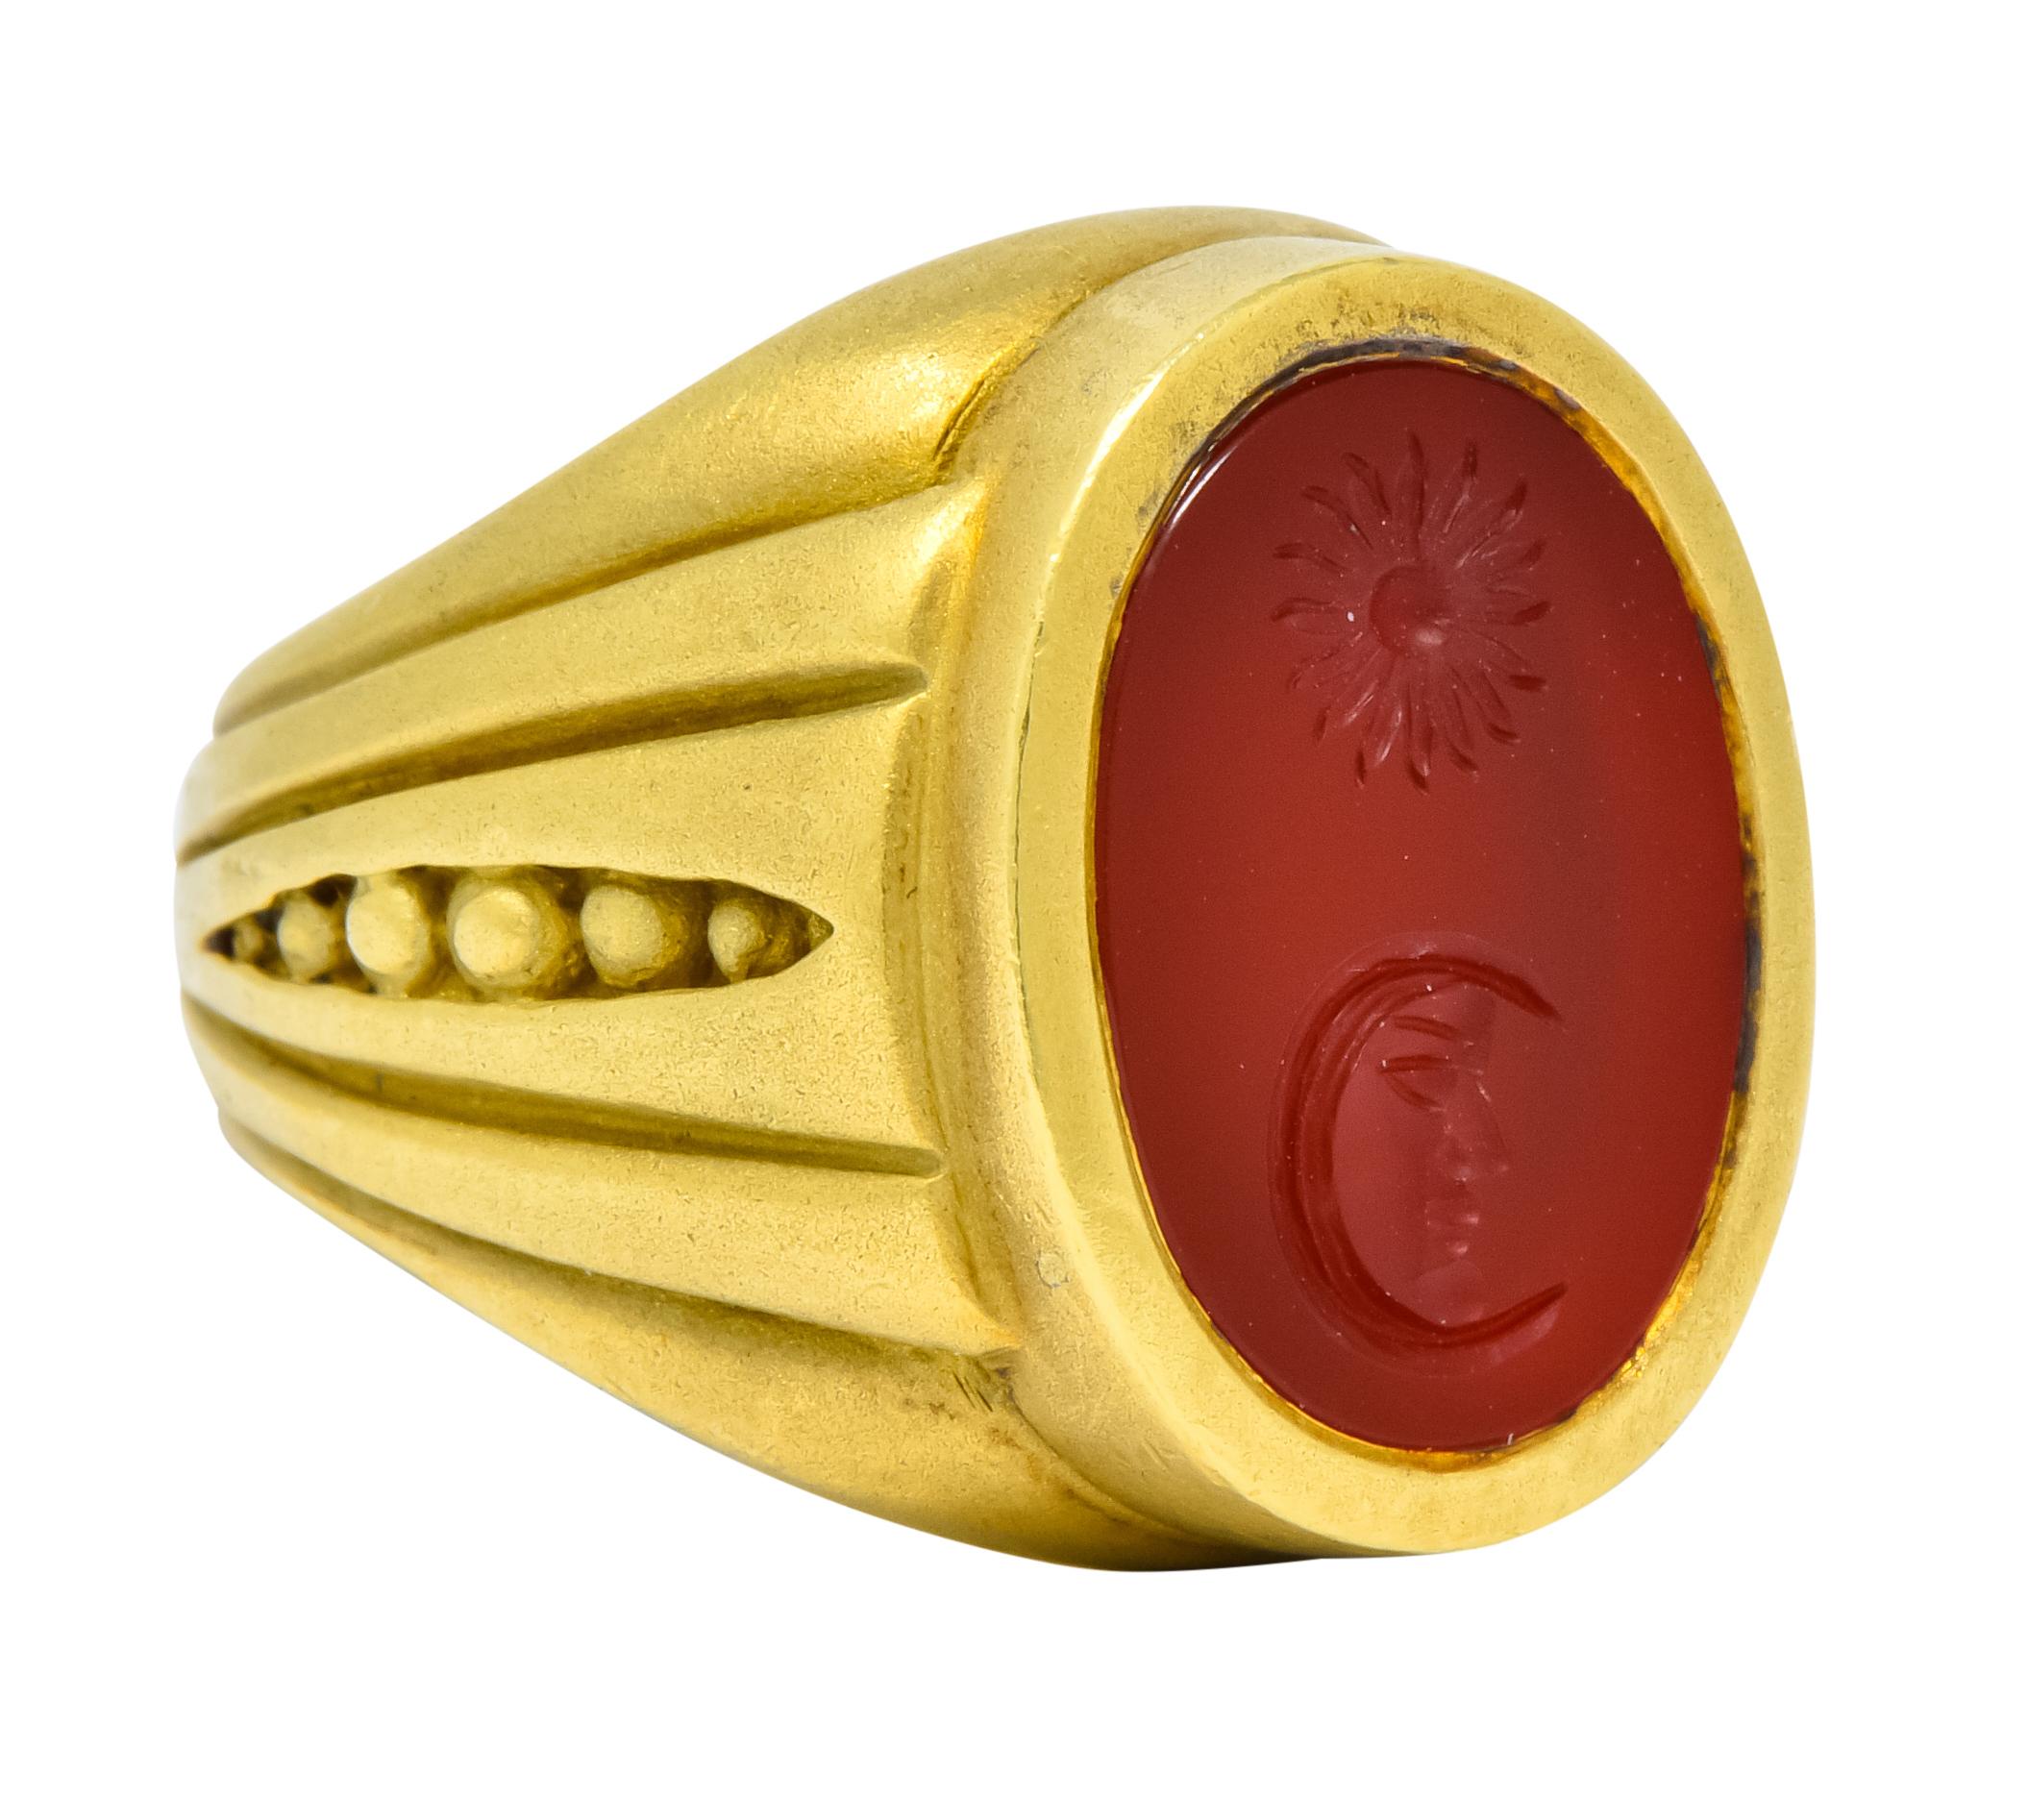 Centering an oval cut tablet of carnelian measuring approximately 5/8 x 7/16 inches, translucent and a vibrant red

Deeply carved with a sun and man-in-moon motif

Bezel set in a matte gold signet style mounting with ribbed shoulders 
centering a